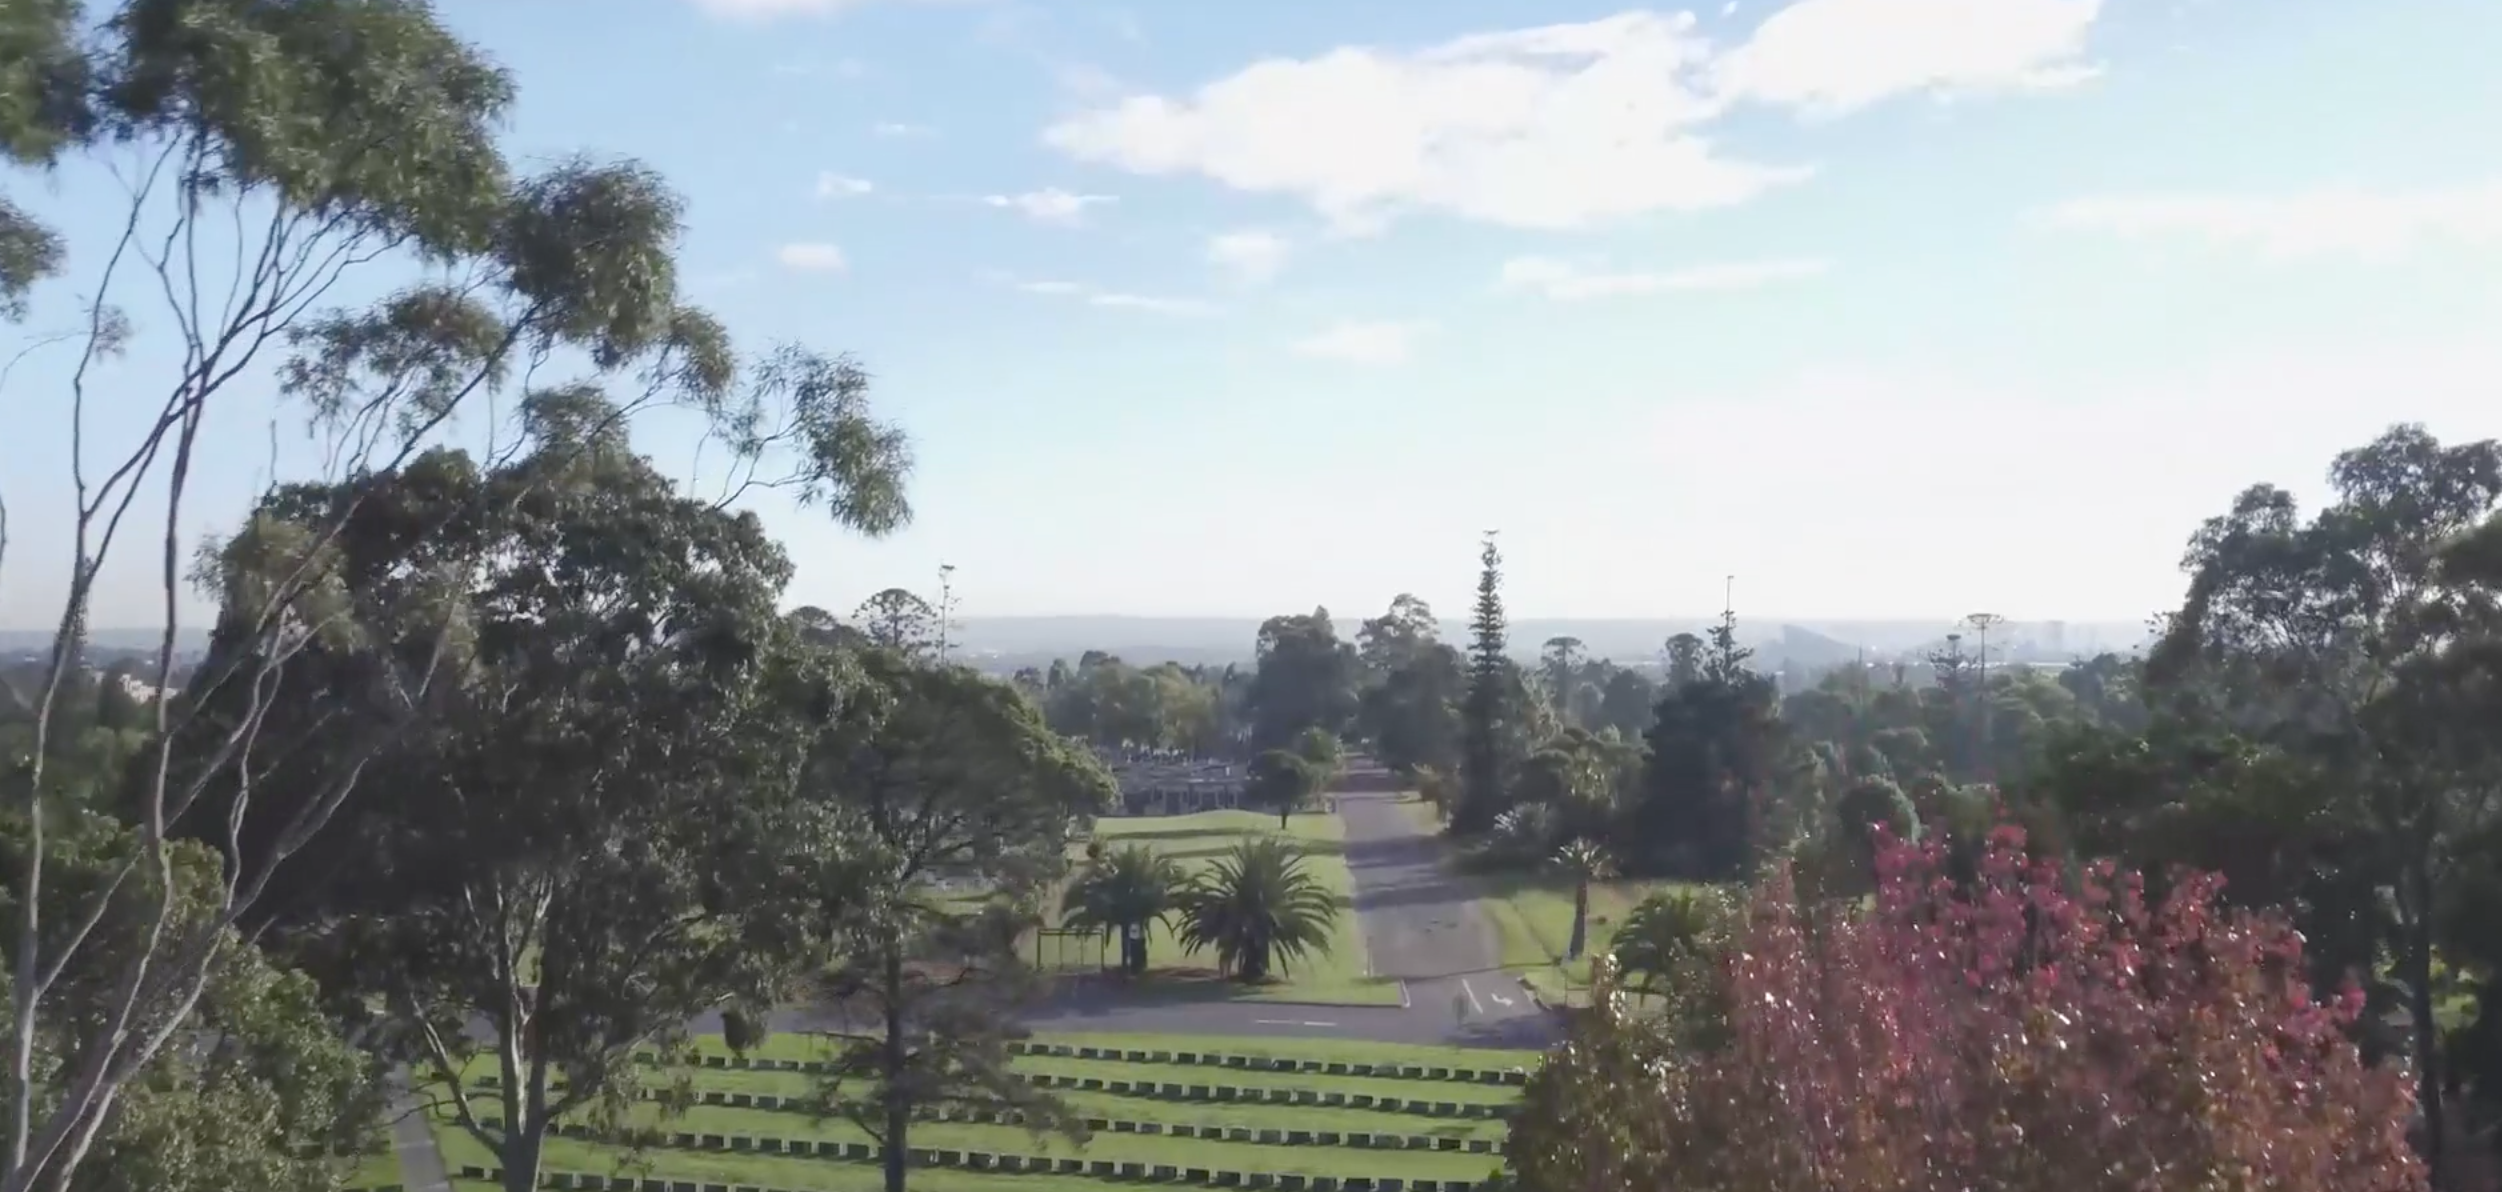 Drone image of Rookwood Cemetery